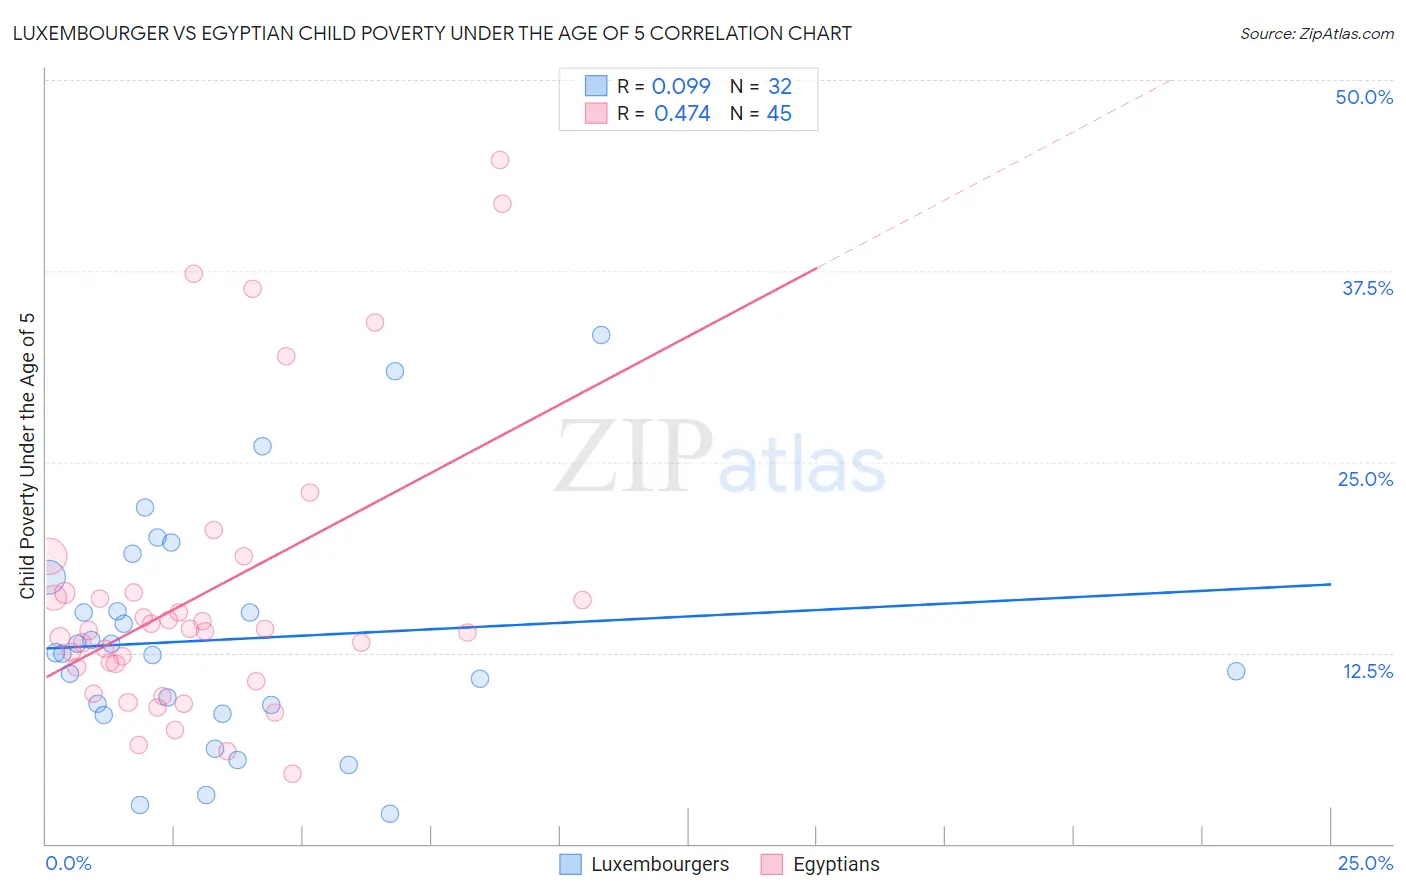 Luxembourger vs Egyptian Child Poverty Under the Age of 5